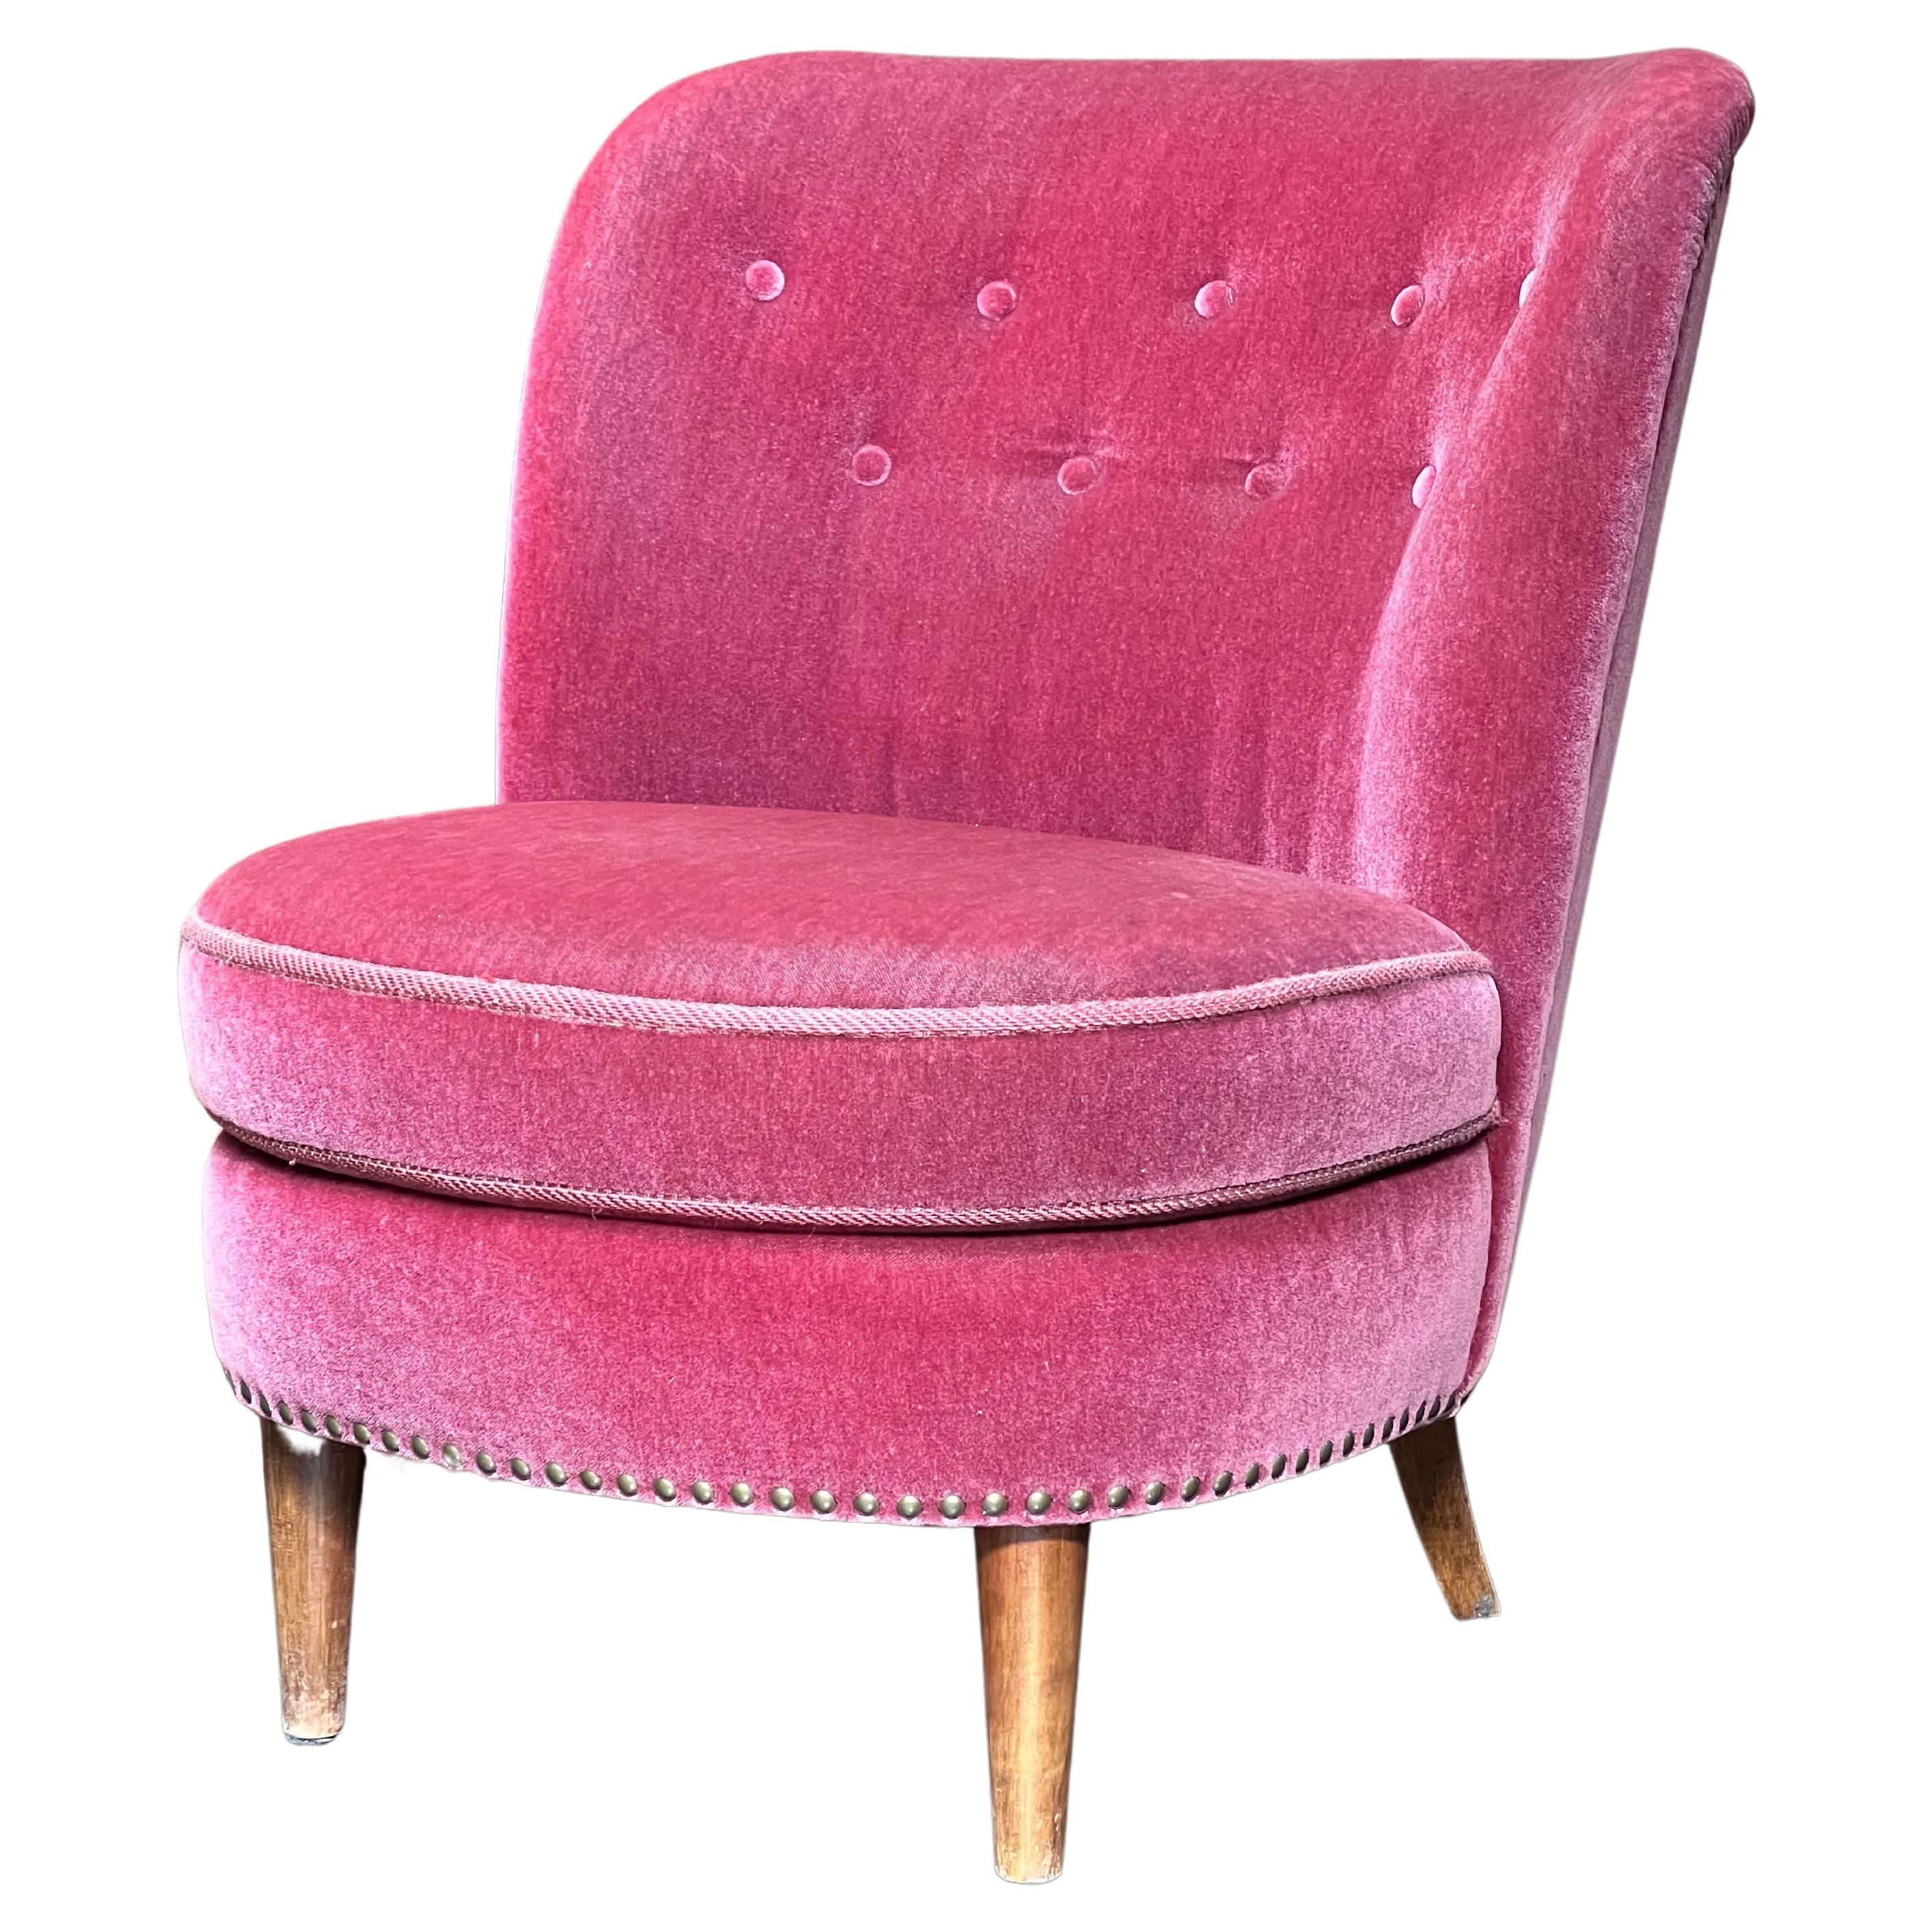 Swedish Grace Pink Mohair and Brass Nails Chauffeuse, Sweden, 1930s For Sale